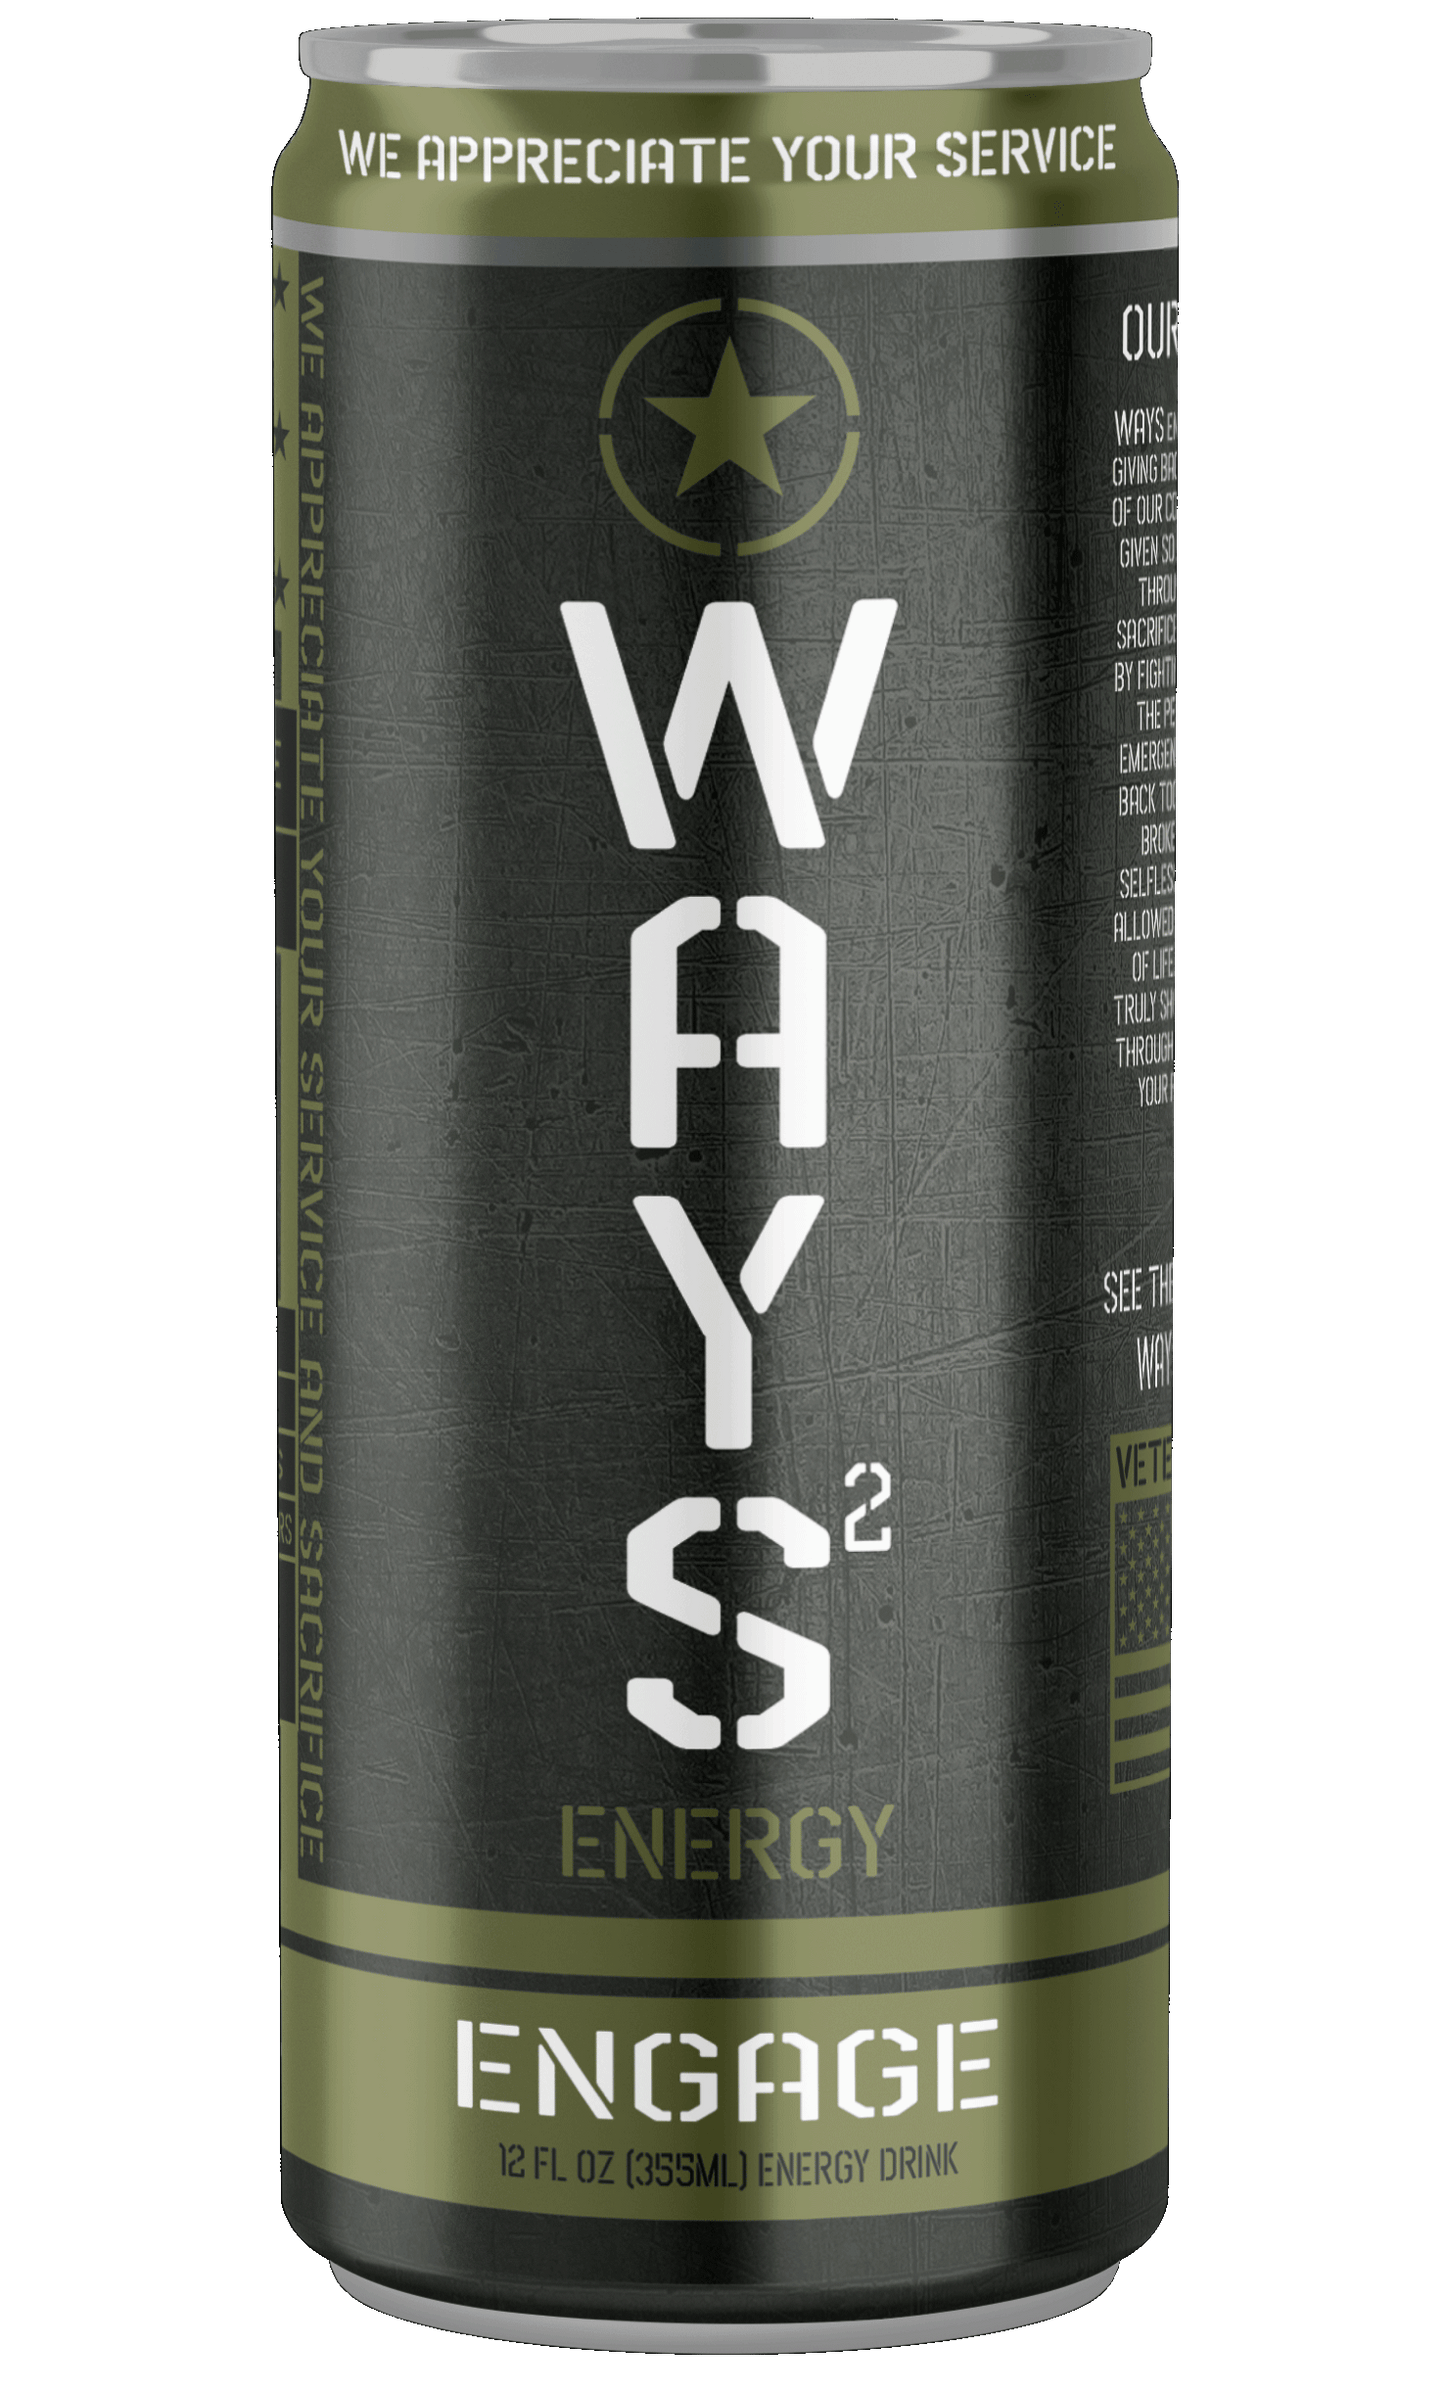 Sour Lime Energy Drink | 12 Pack Energy Drink | WAYS Energy